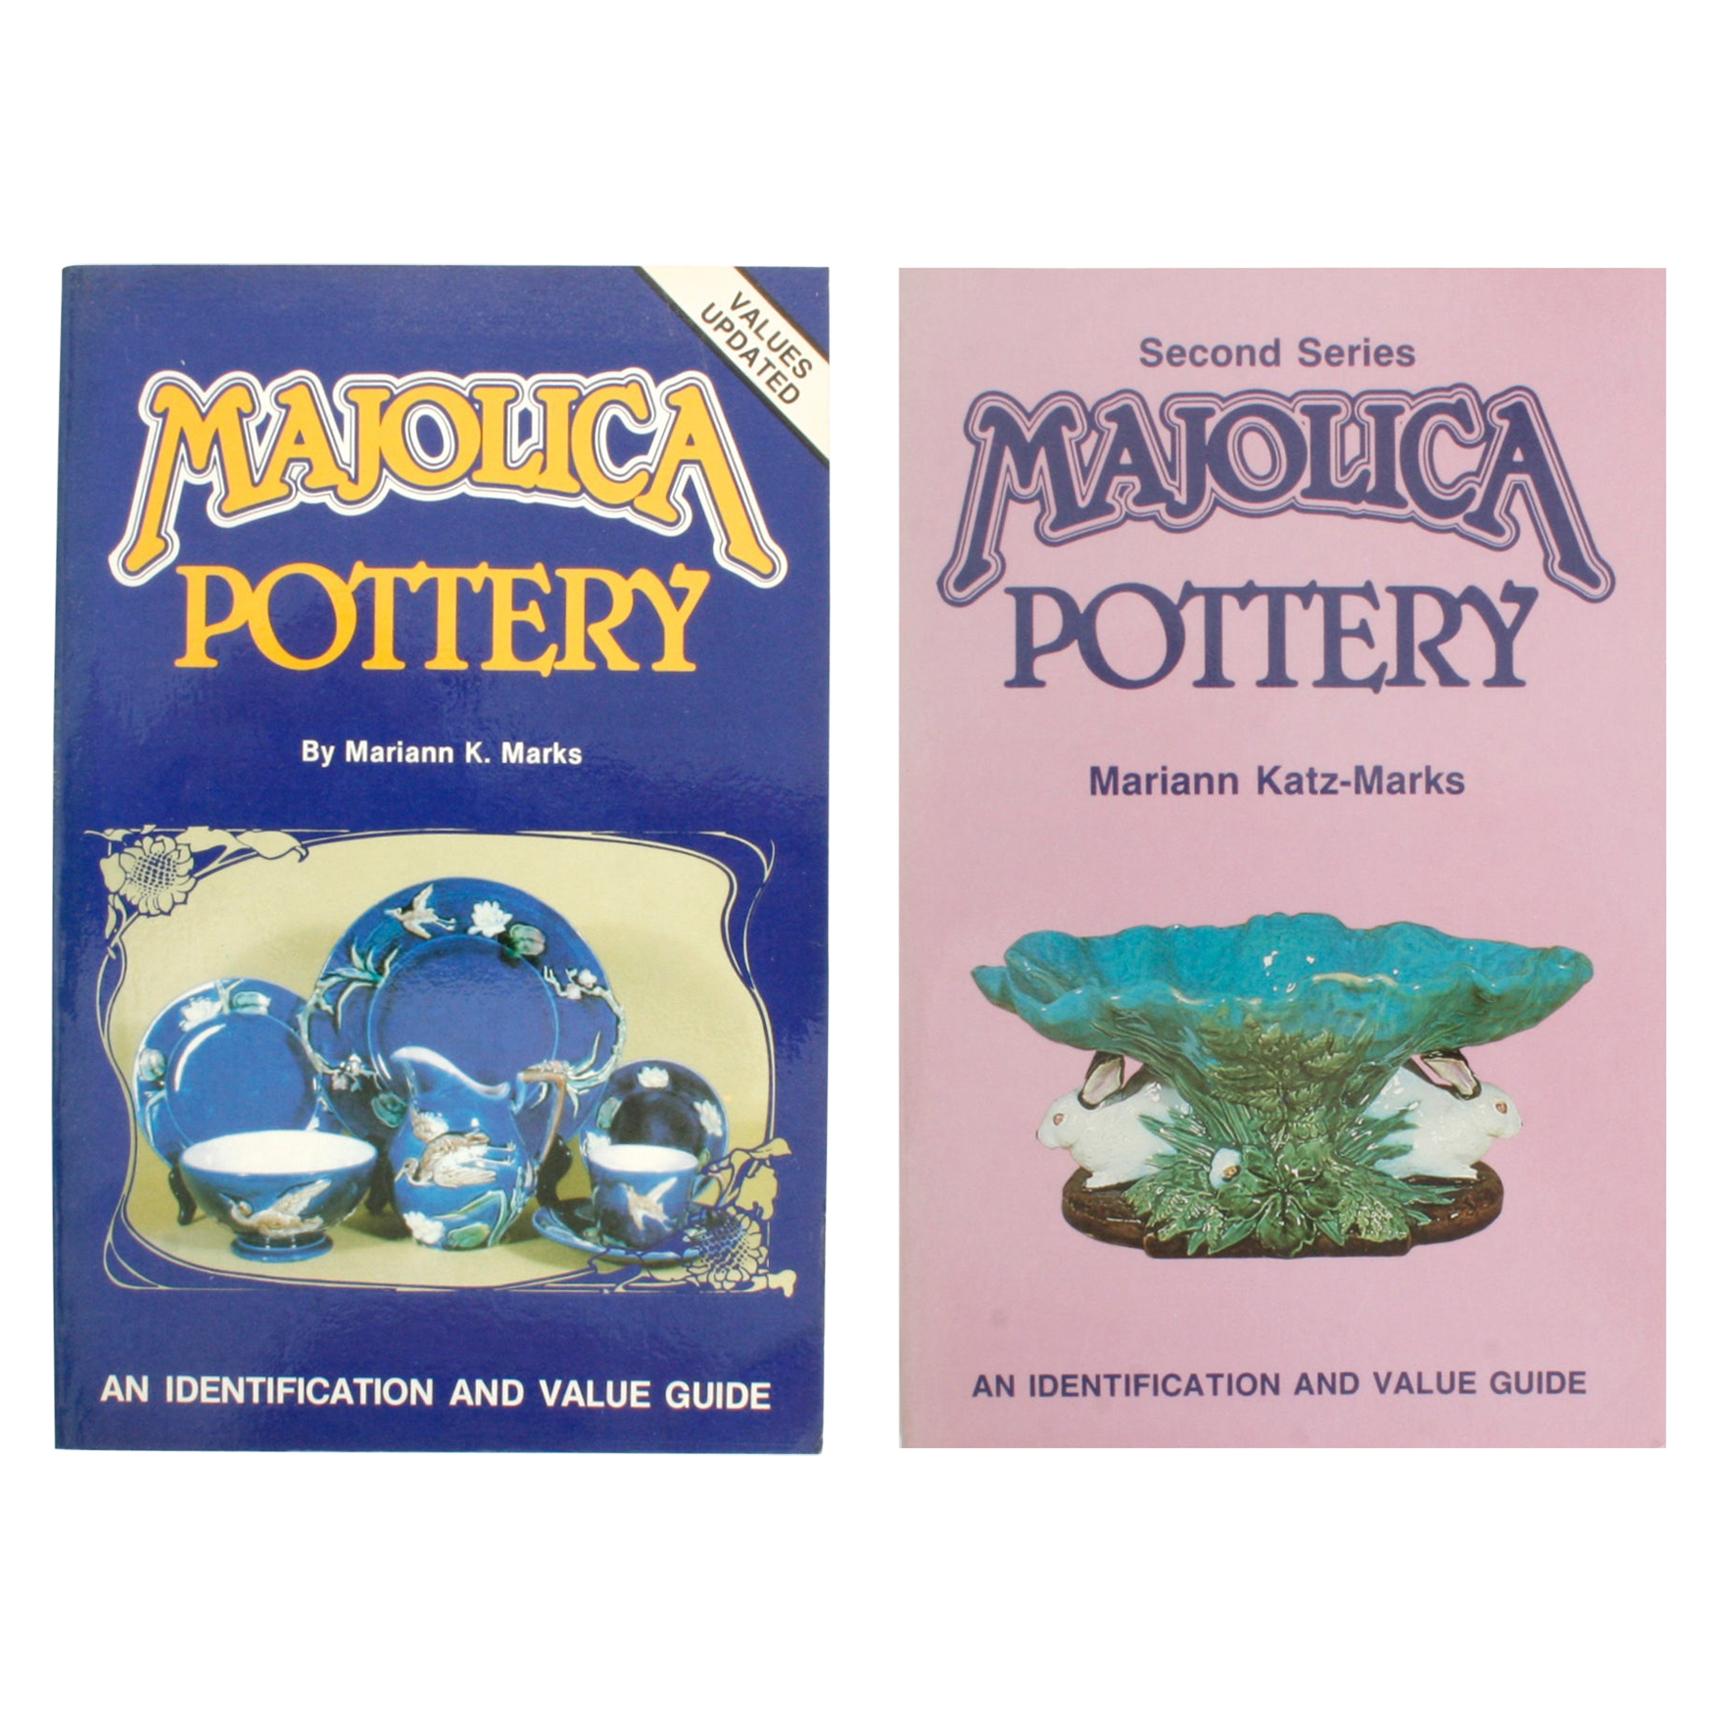 Two Books on Majolica Pottery by Mariann K. Marks